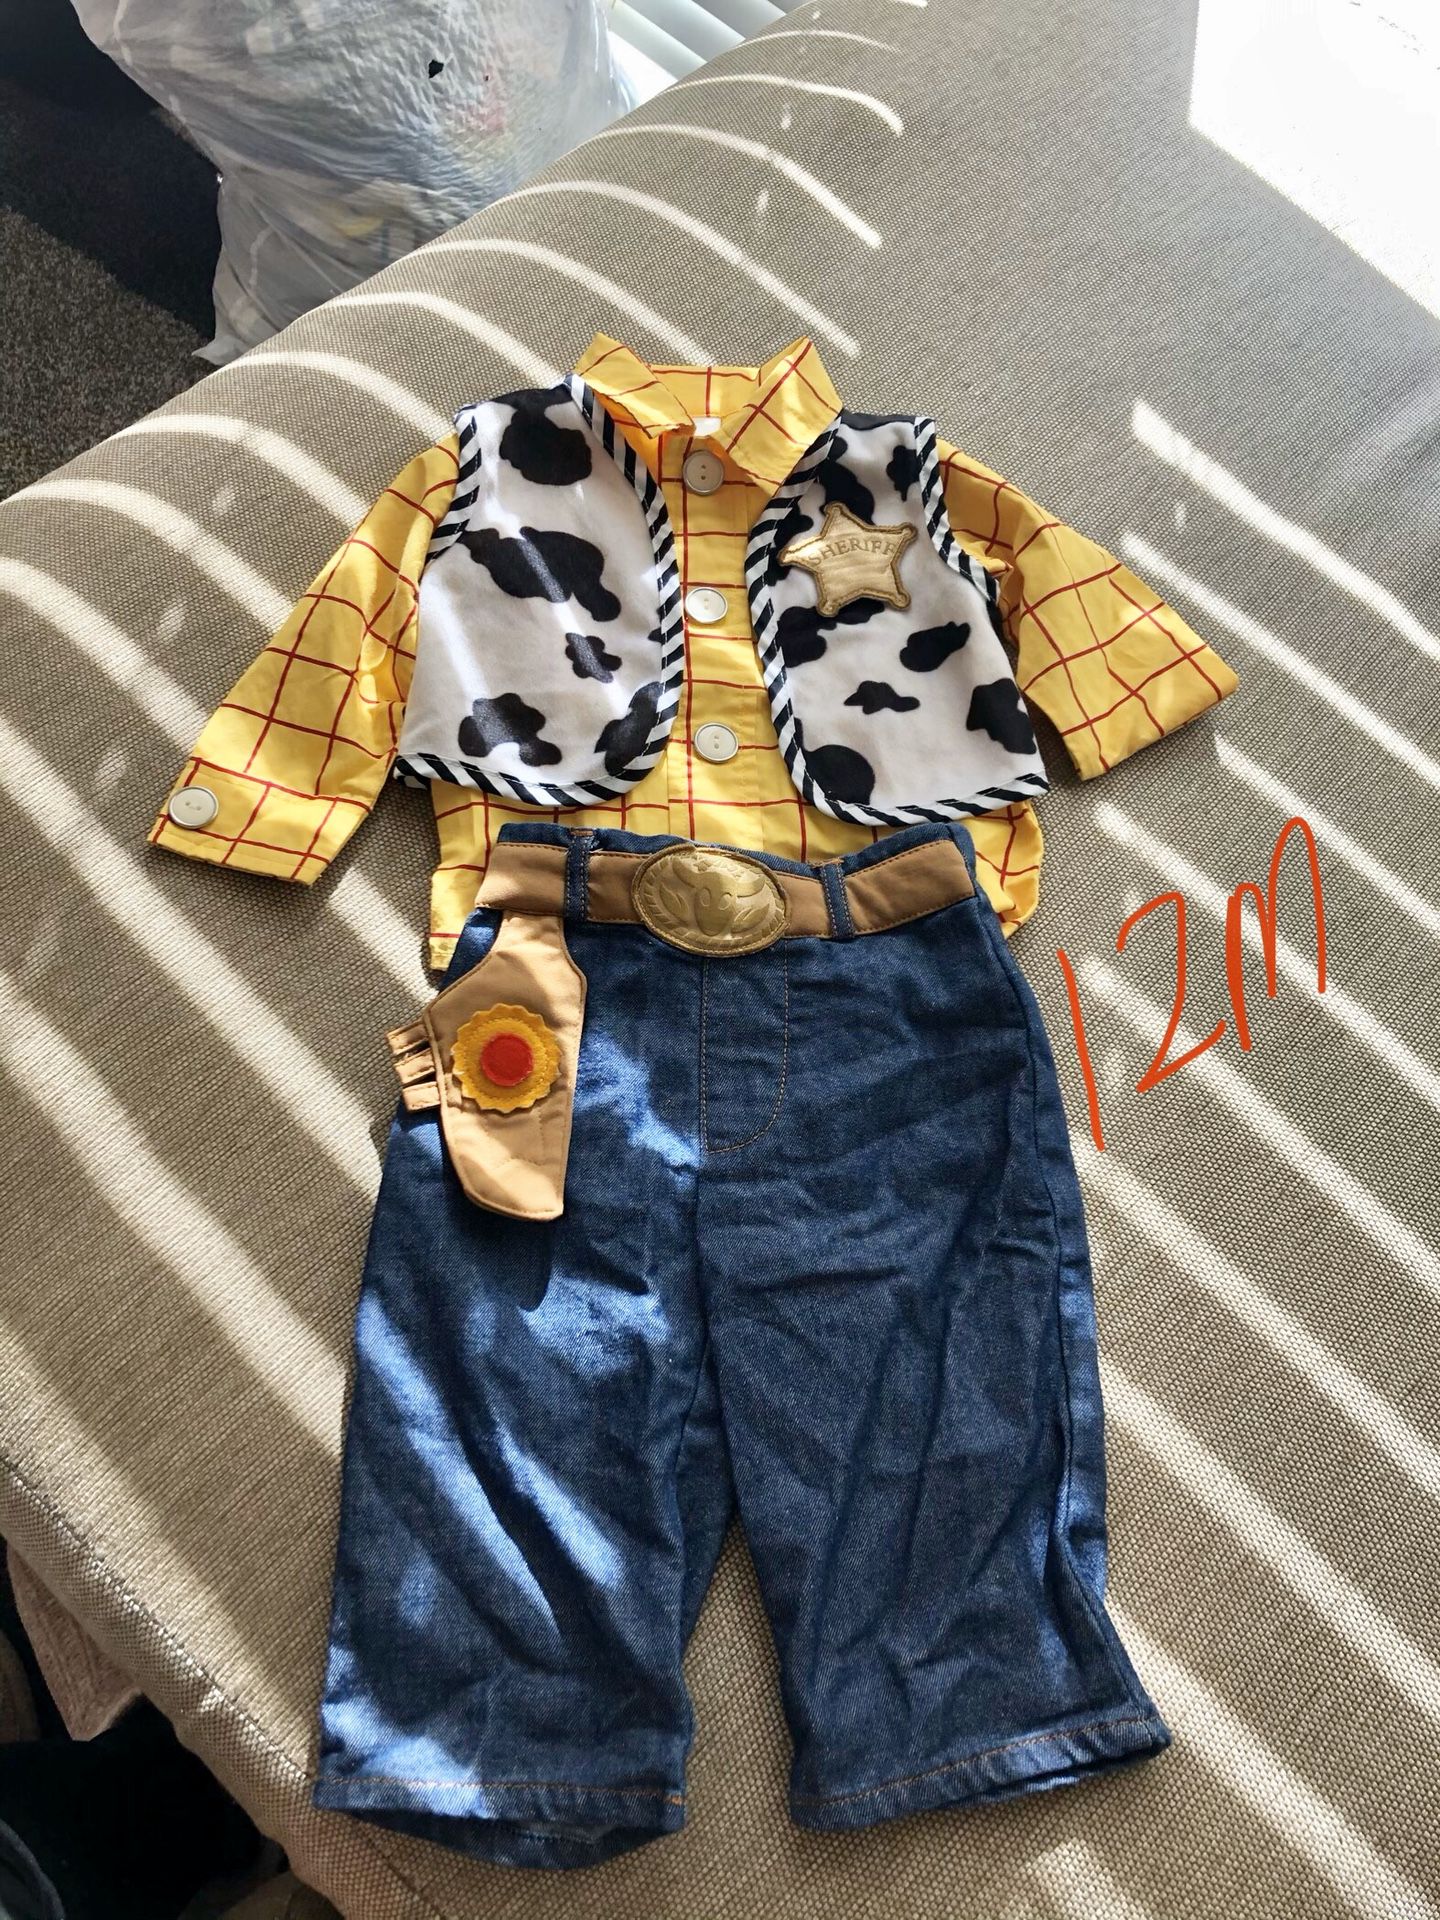 Woody costume for boys